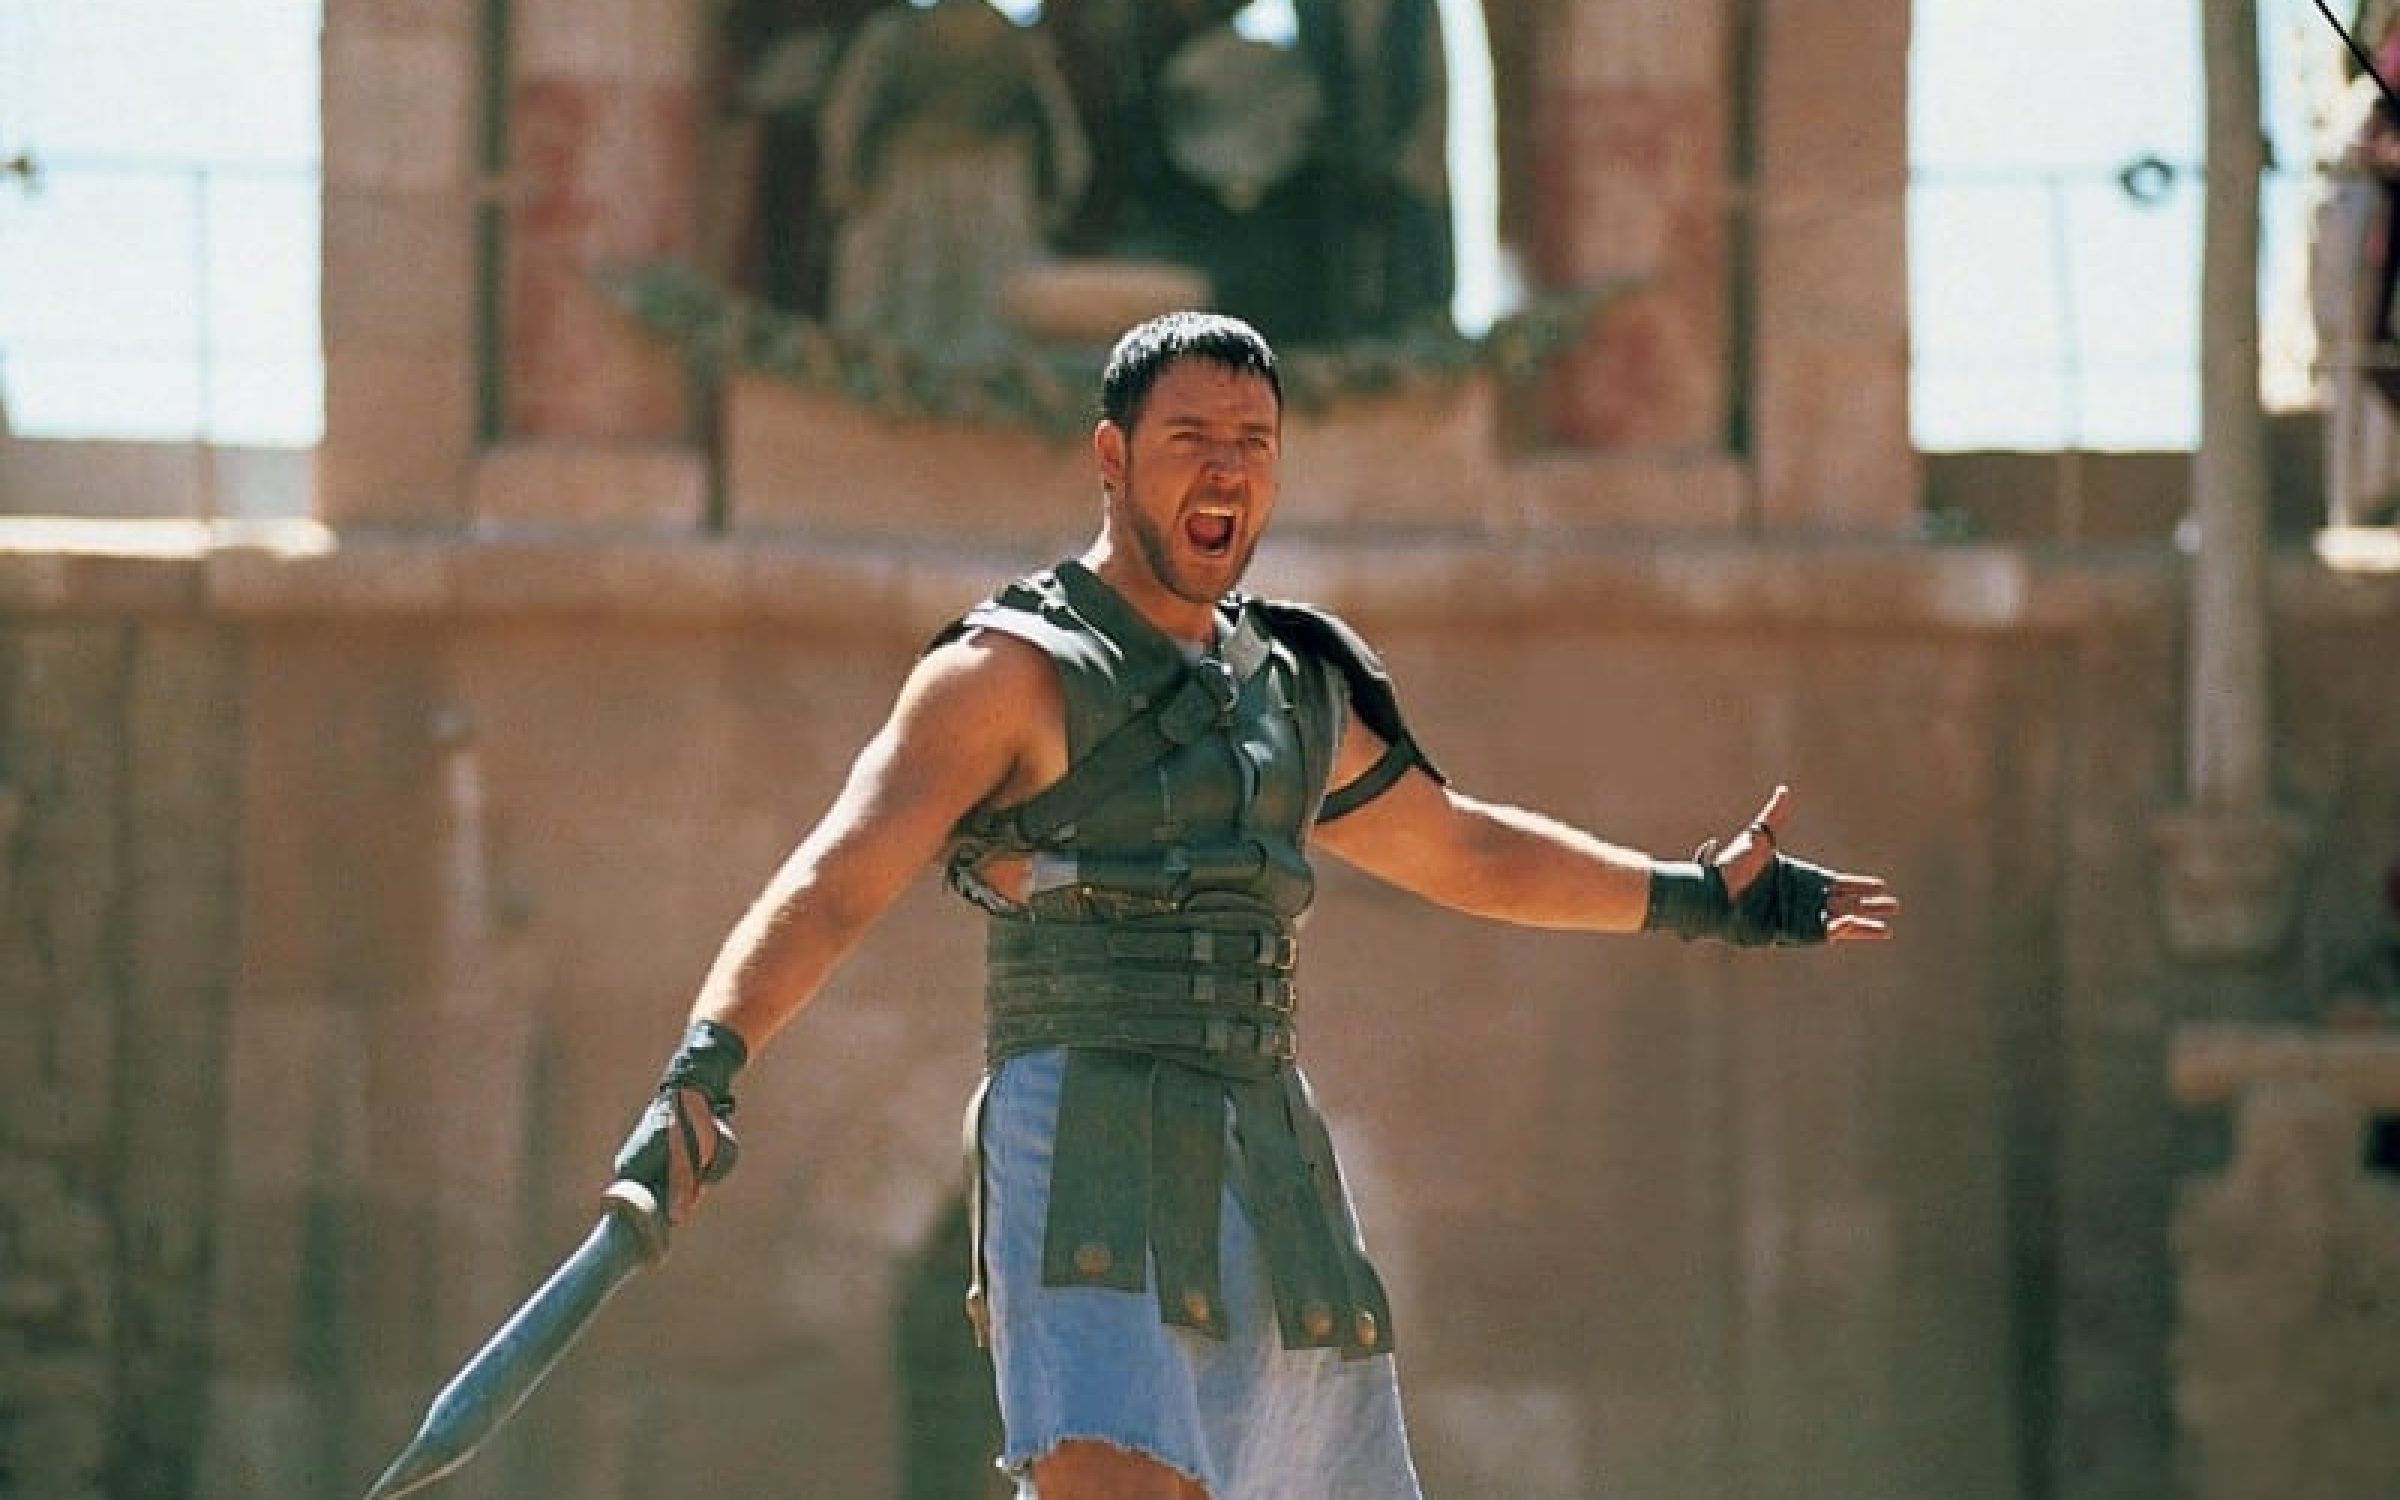 ladiator is a 2000 epic historical drama film directed by Ridley Scott, starring Russell Crowe.